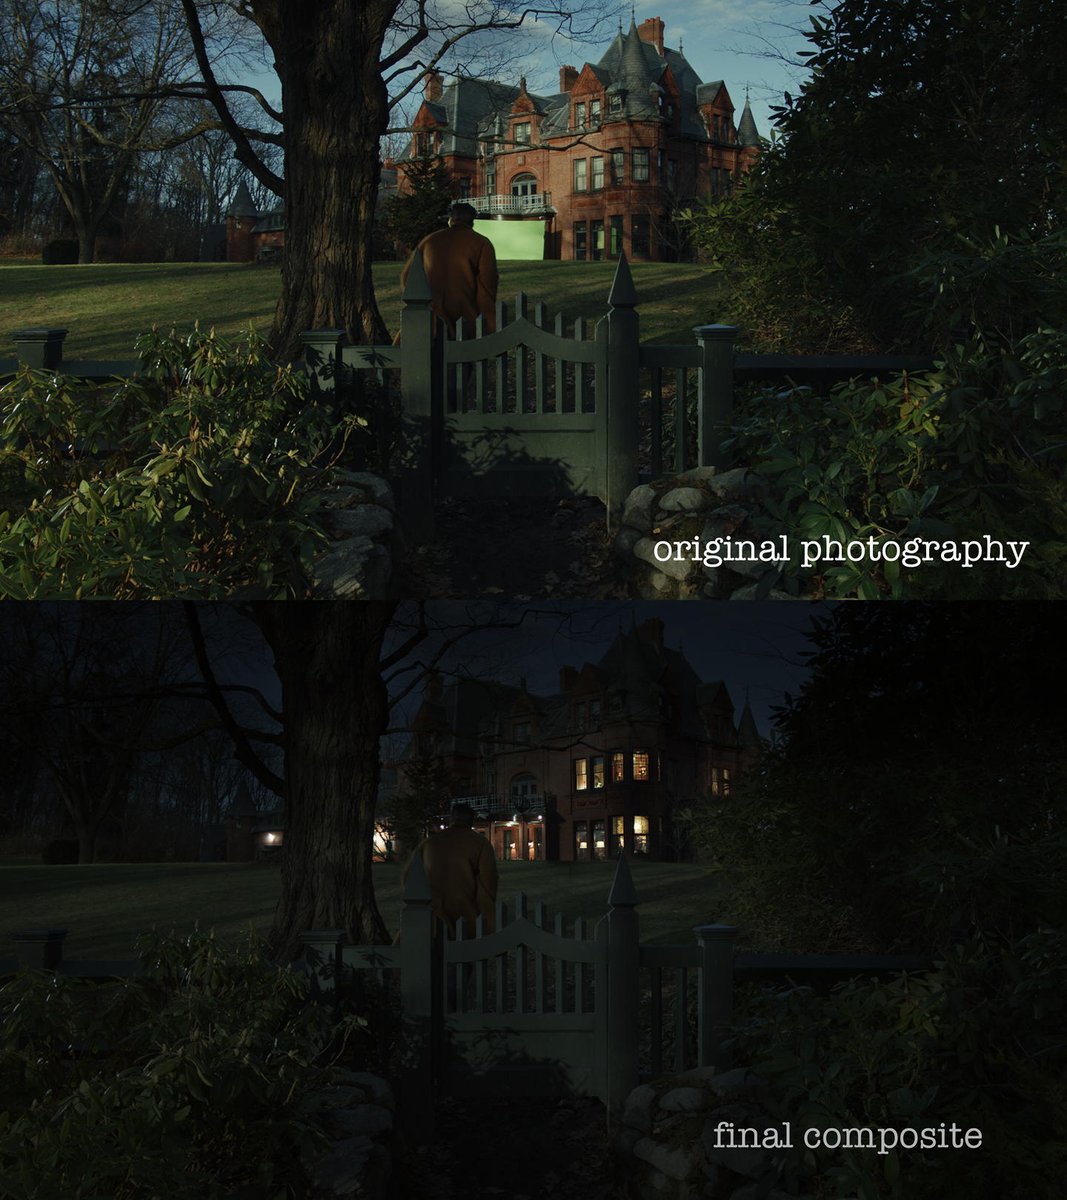 Steve Yedlin On Twitter Behind The Scenes Diy Fun Many Of The Impressionistic Night Exteriors On Knivesout Were Combinations Of Day For Night And Night For Night In The Same Shot I Did The Compositing Myself On My